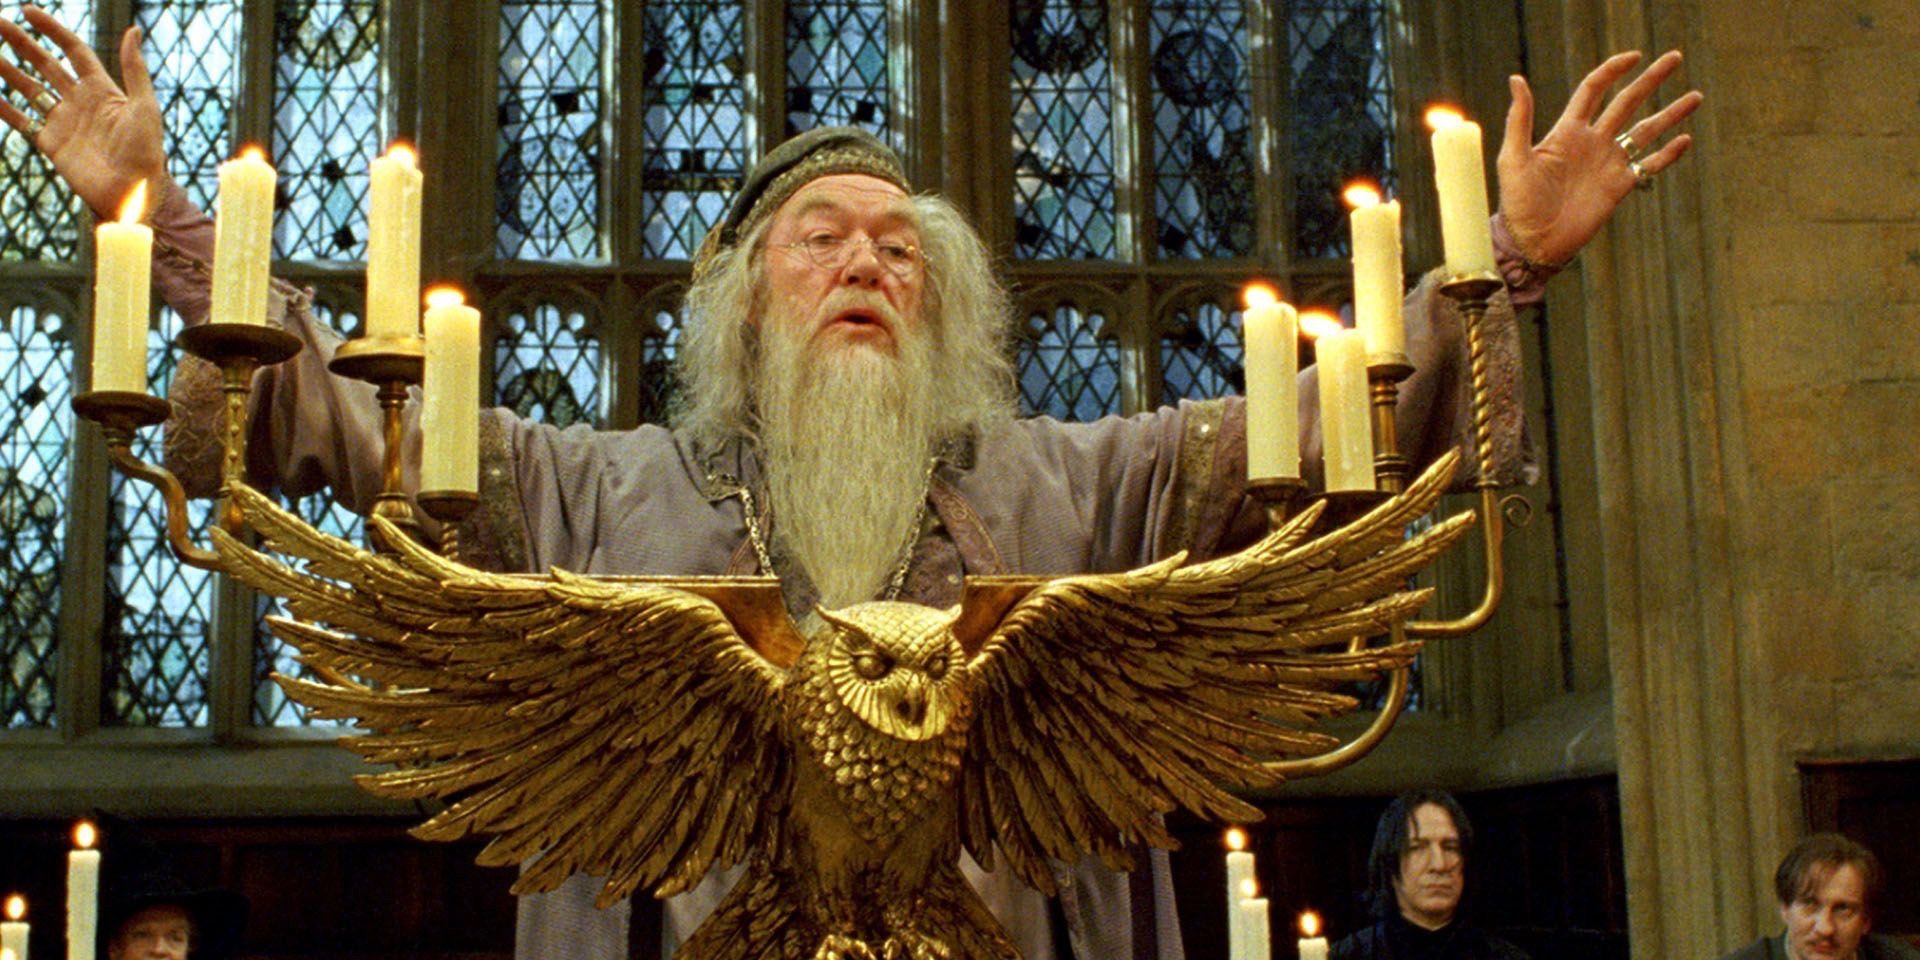 Dumbledore speaking at Hogwarts in Harry Potter